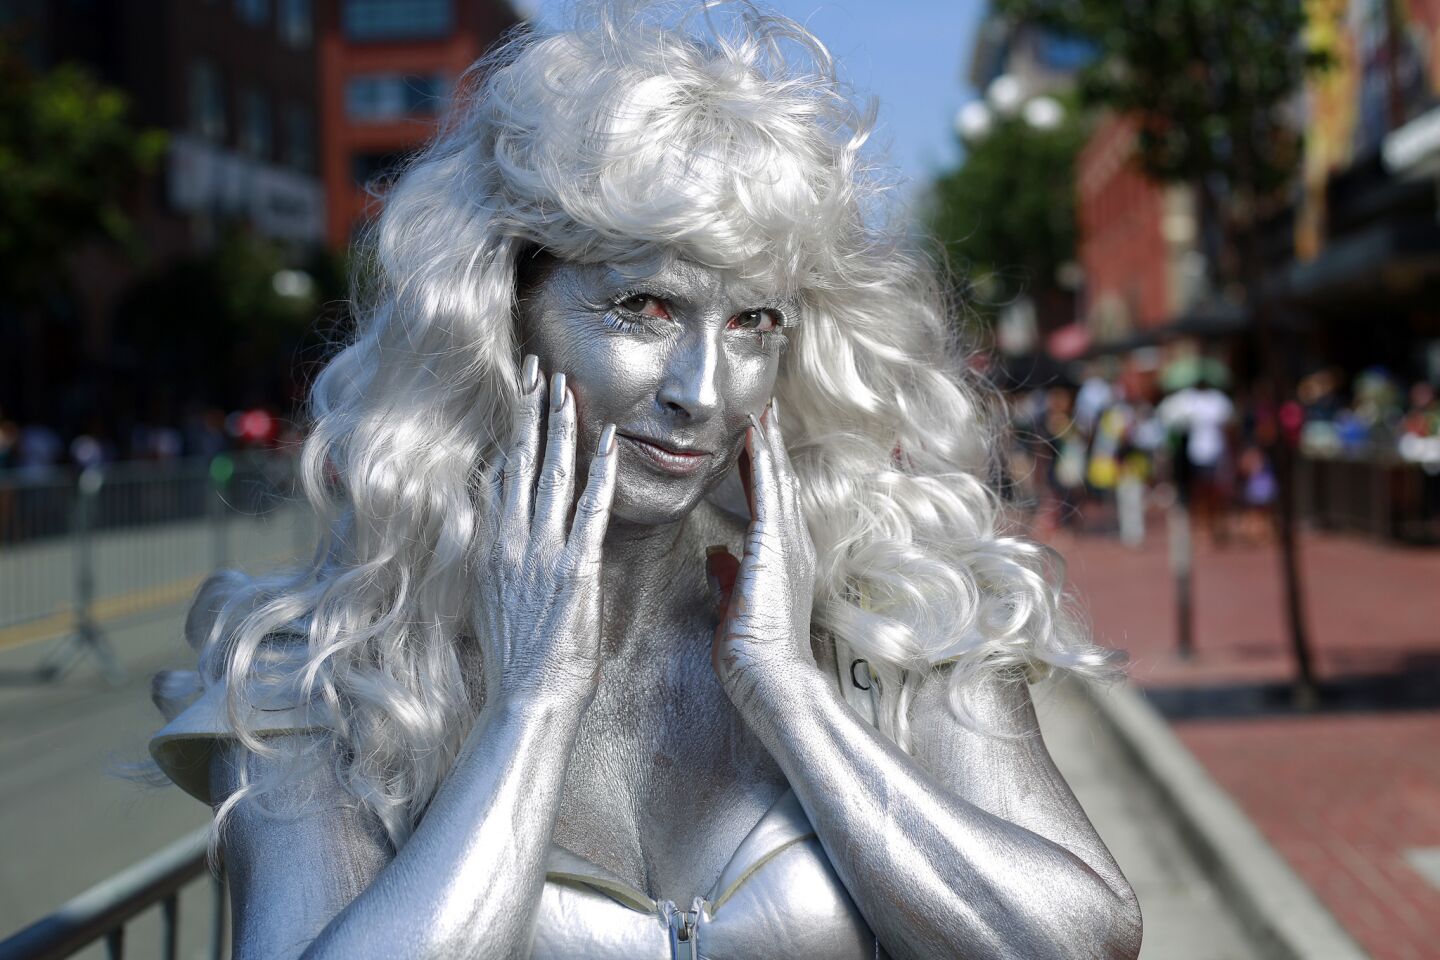 Michelle Pina of San Diego as the wife of Silver Surfer at Comic-Con International.